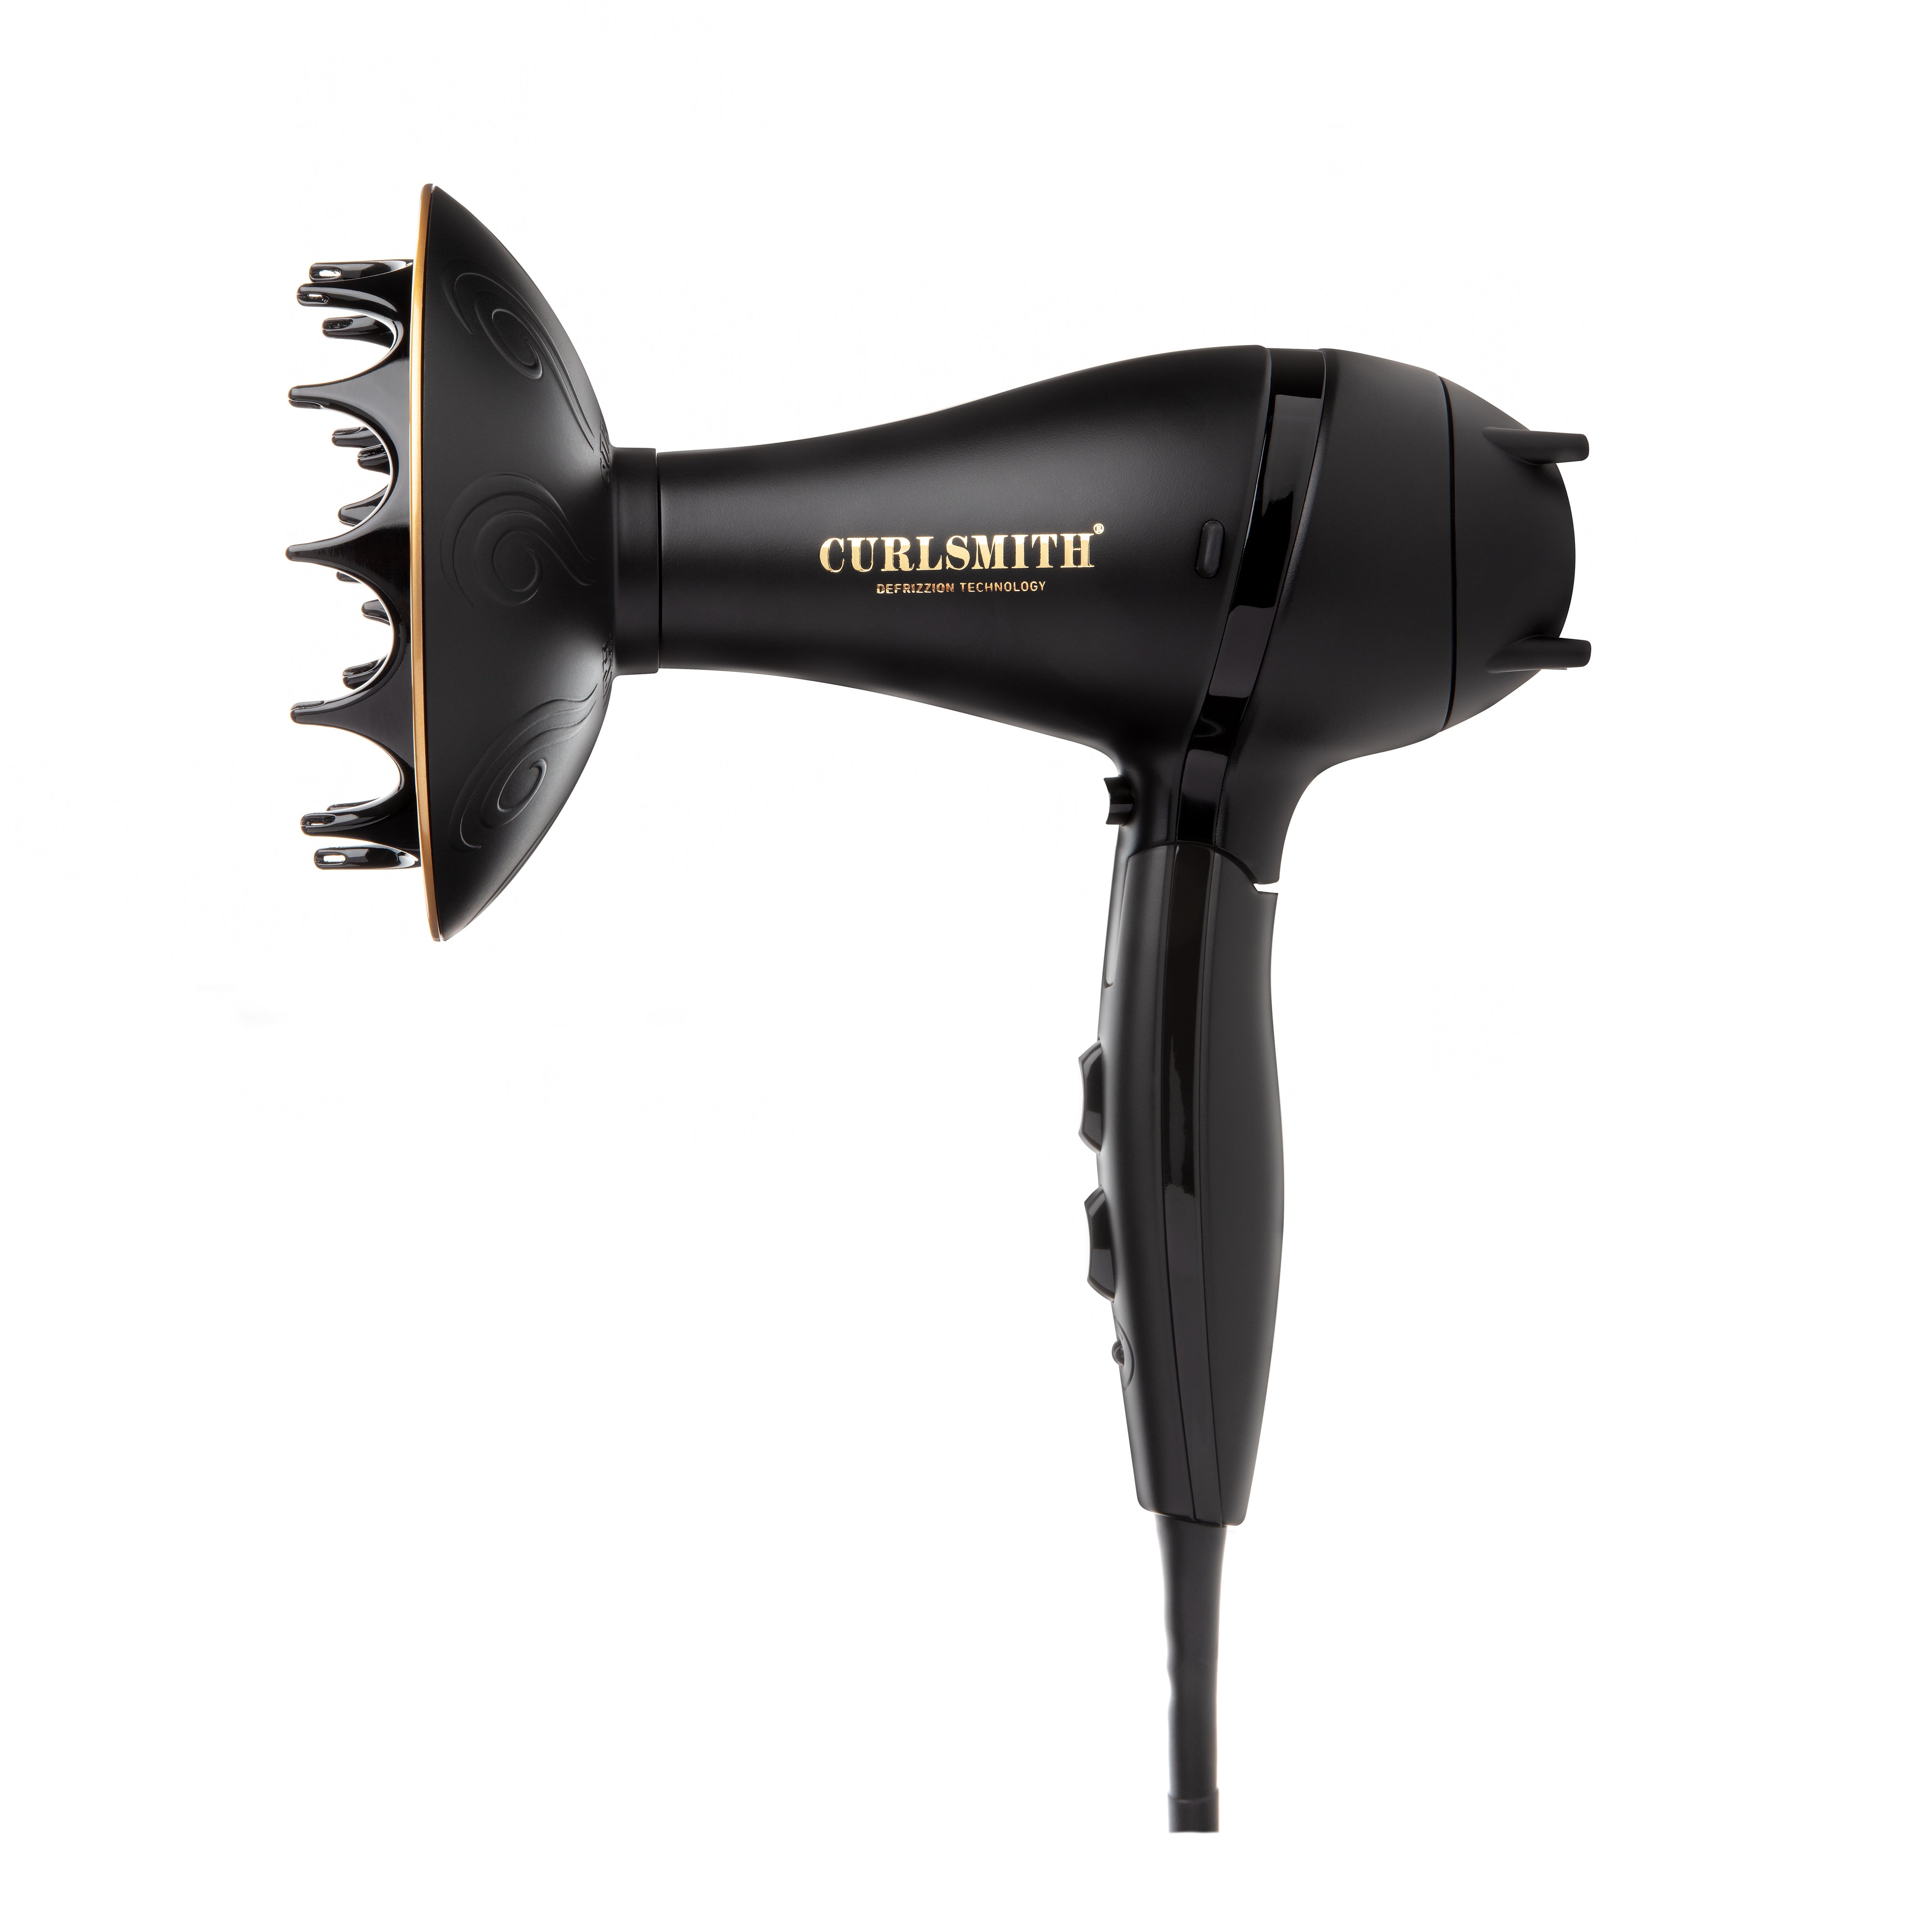 STARMIX HAIR DRYER - TFW 12 - Tools From Us